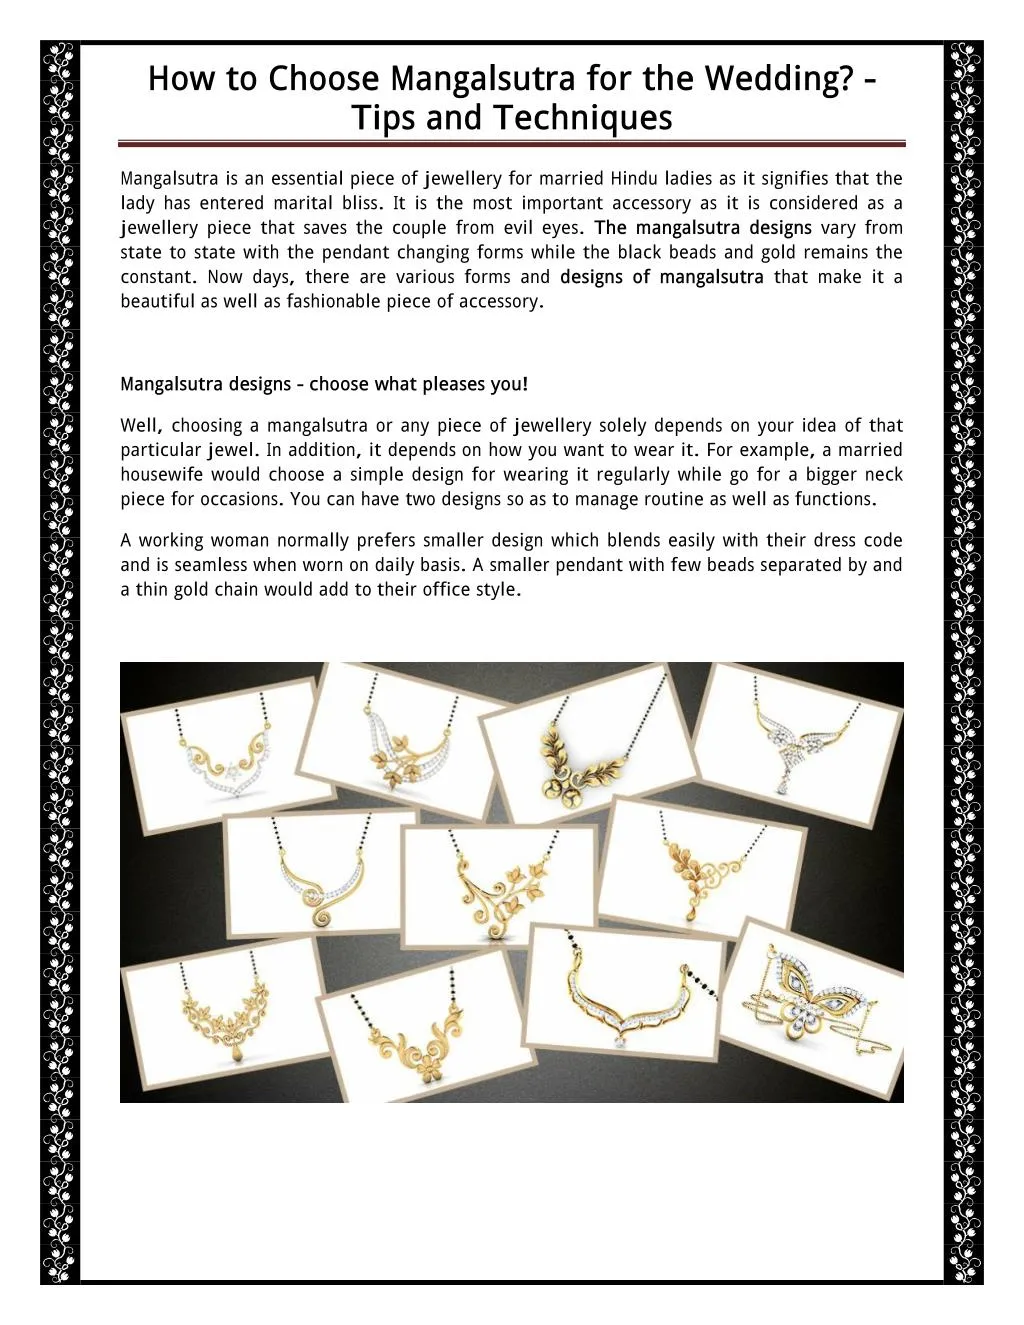 how to choose mangalsutra for the wedding tips